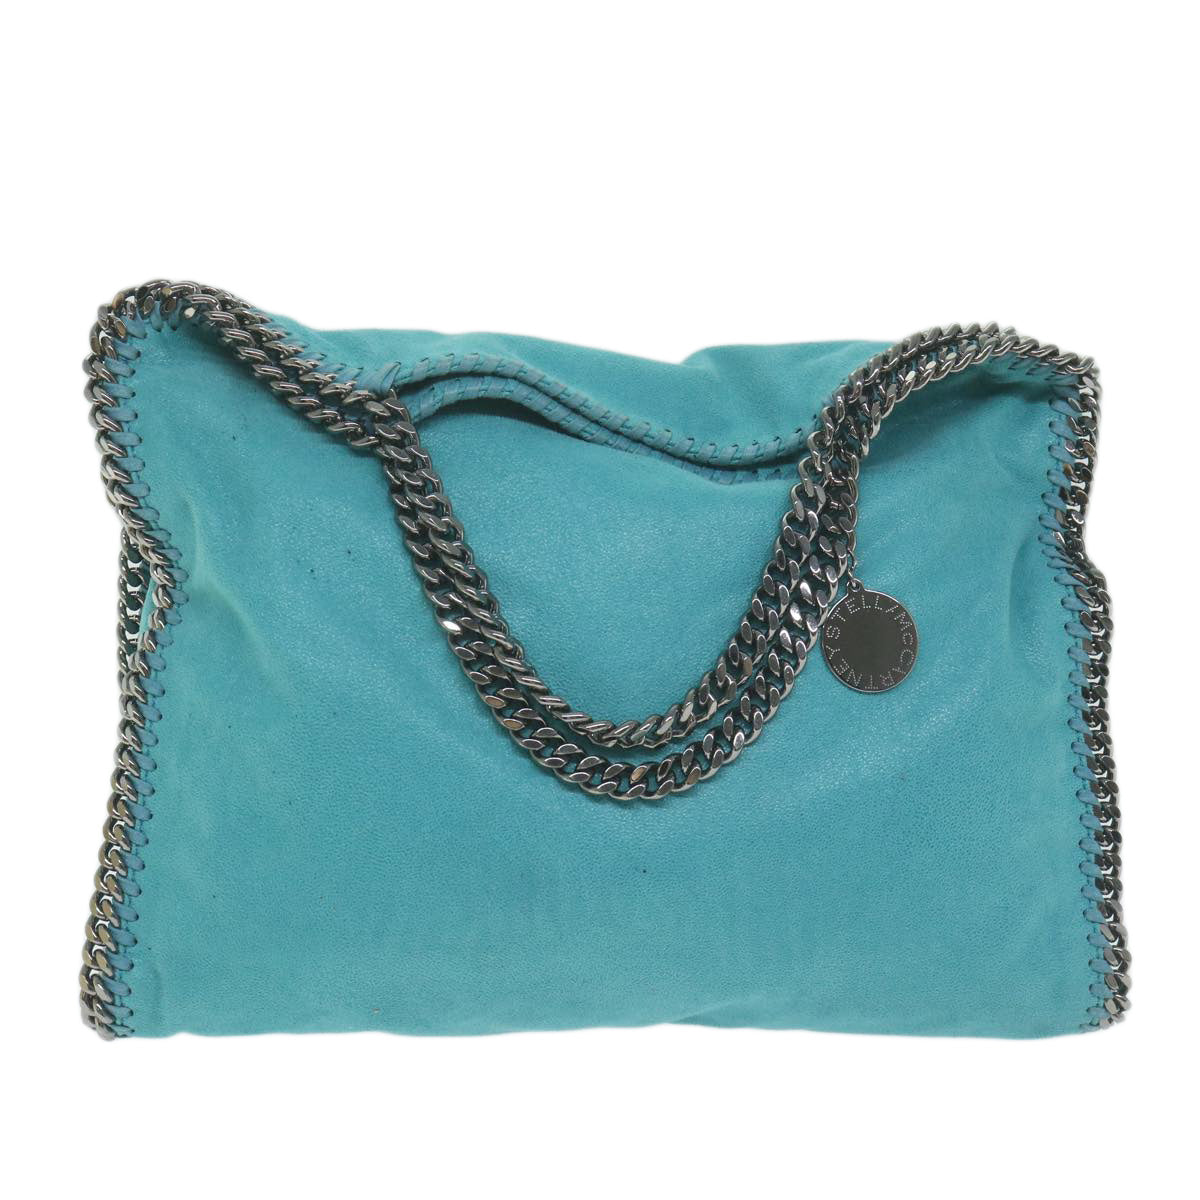 Stella MacCartney Chain Falabella Bag Polyester Turquoise Blue Auth 60808 - 0